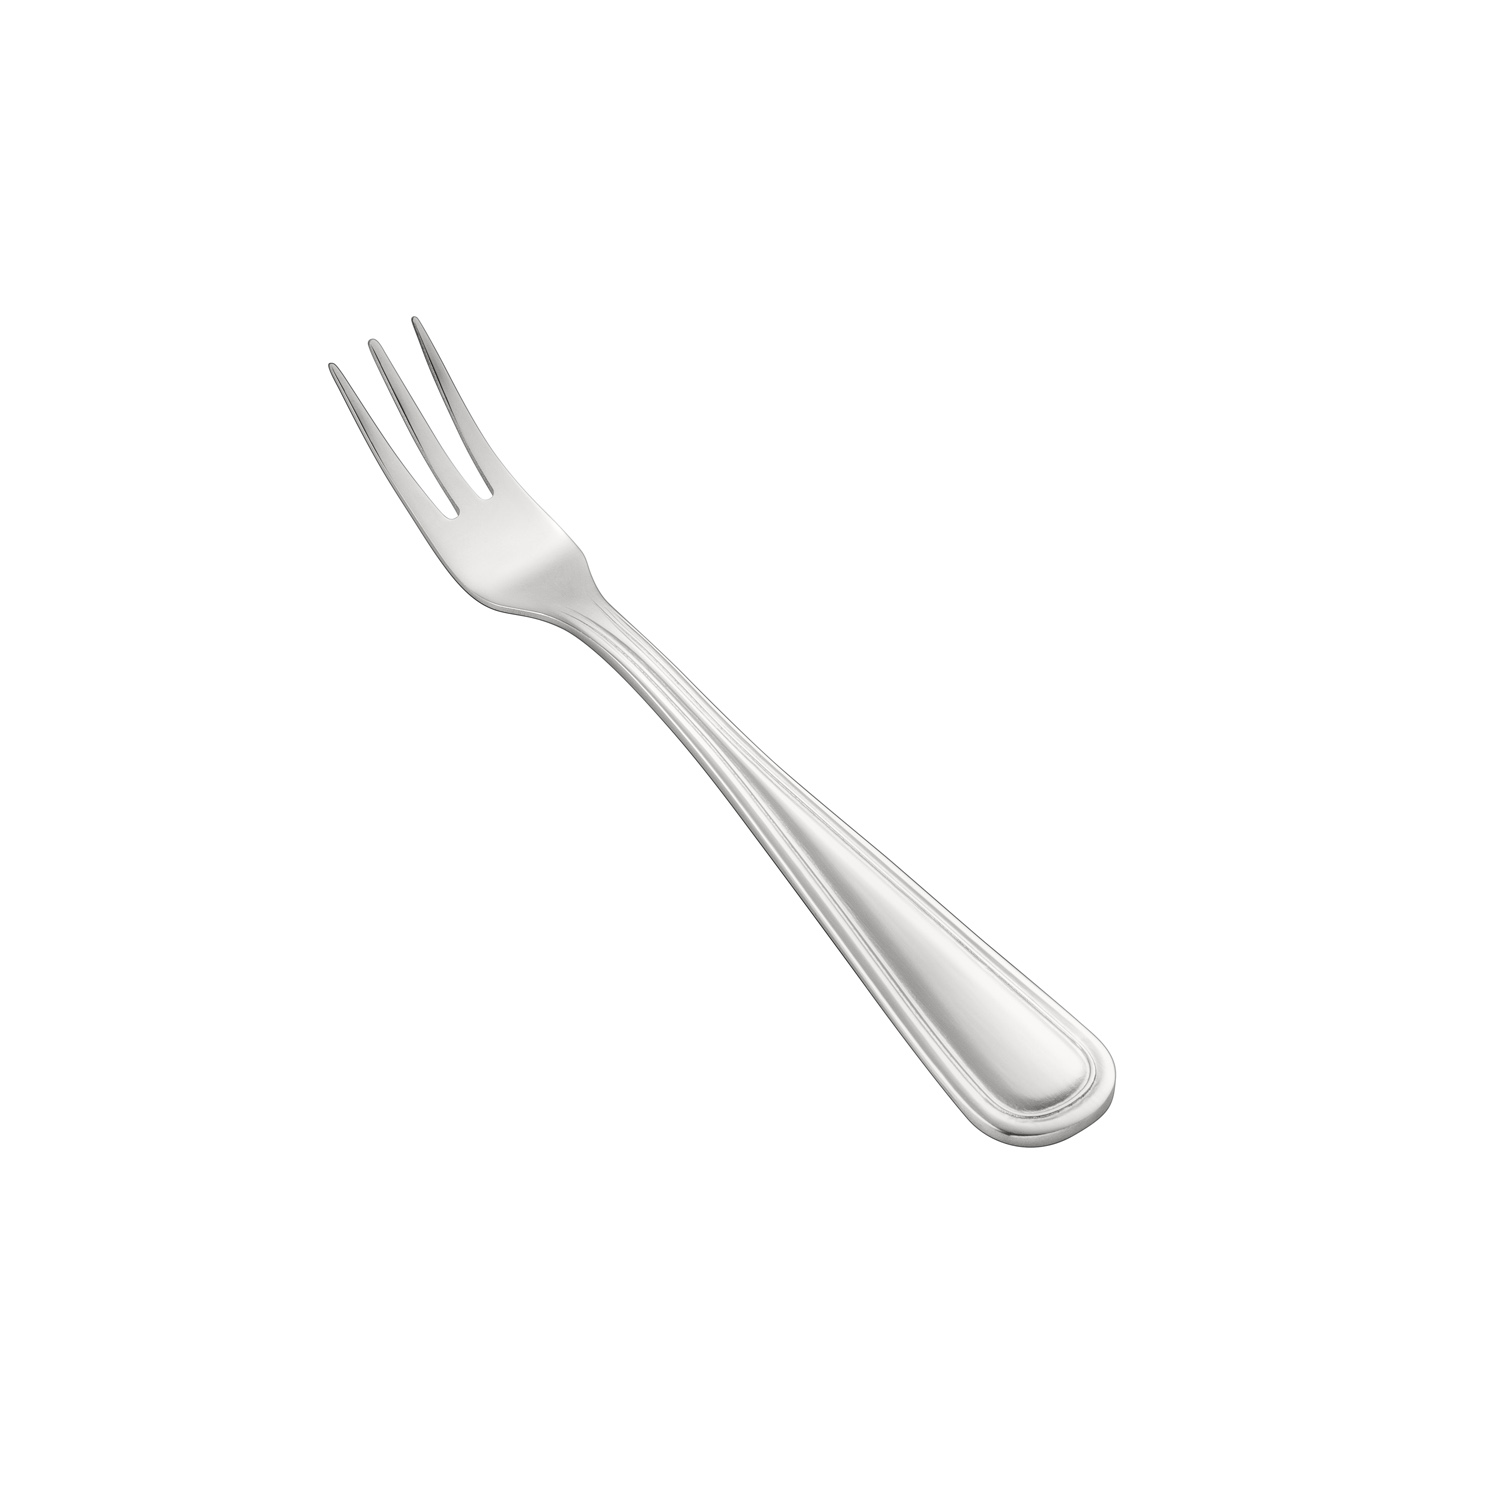 CAC China 8002-07 Elite Oyster Fork, Extra Heavyweight 18/8, 5 3/4"